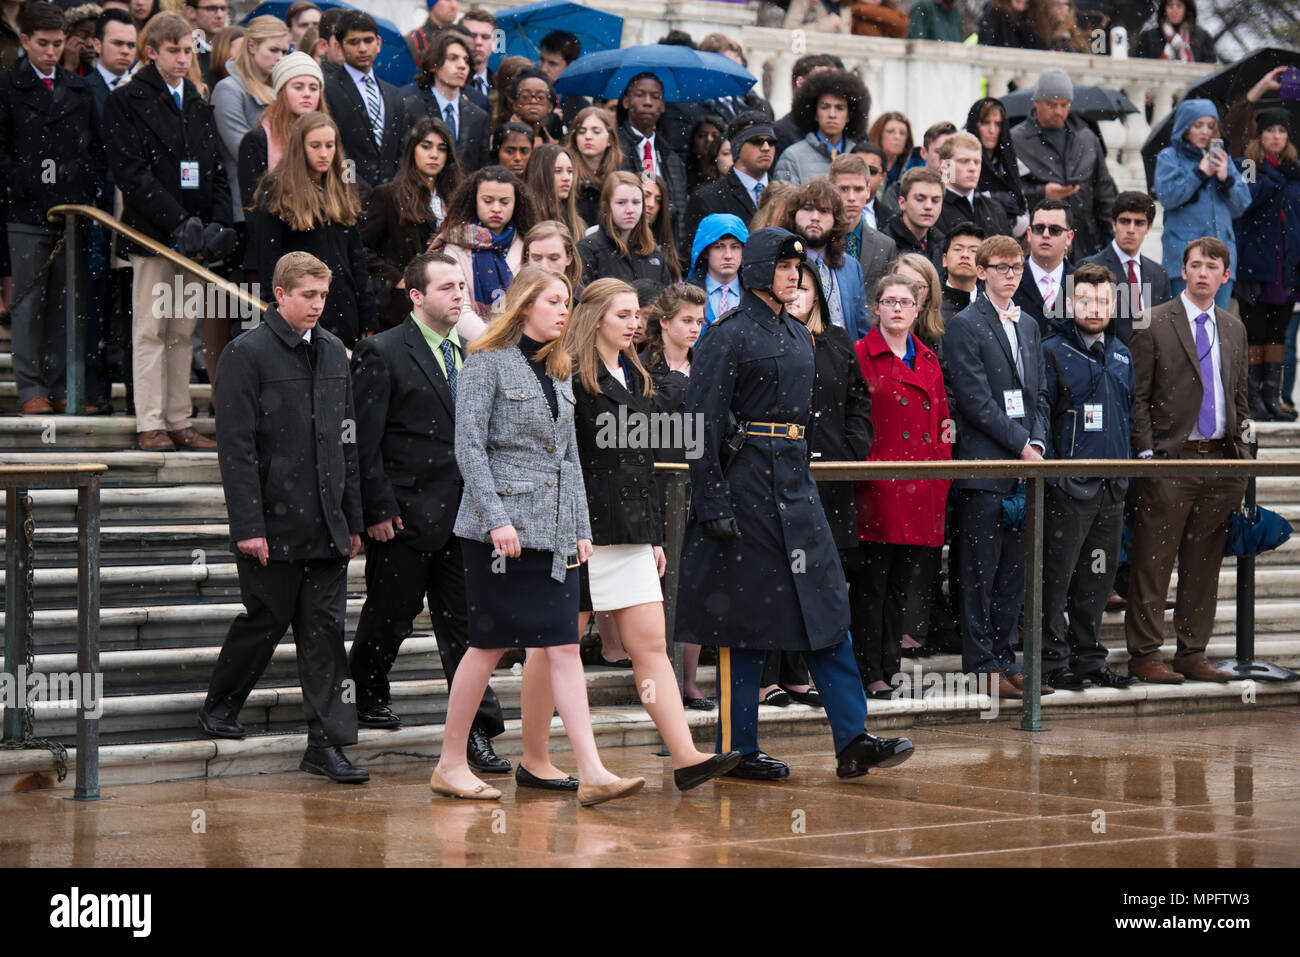 From the left, Andrew Pogue, from Missouri; Dakota Fleury, from Washington, D.C.; Marion Lovett, from New Hampshire; and Amanda Finnegan, from South Dakota; represent the high school students participating in the United States Senate Youth Program during a wreath laying ceremony at the Tomb of the Unknown Soldier in Arlington National Cemetery, March 10, 2017, in Arlington, Va. The students also toured the Memorial Amphitheater Display Room. (U.S. Army photo by Rachel Larue/Arlington National Cemetery/released) Stock Photo